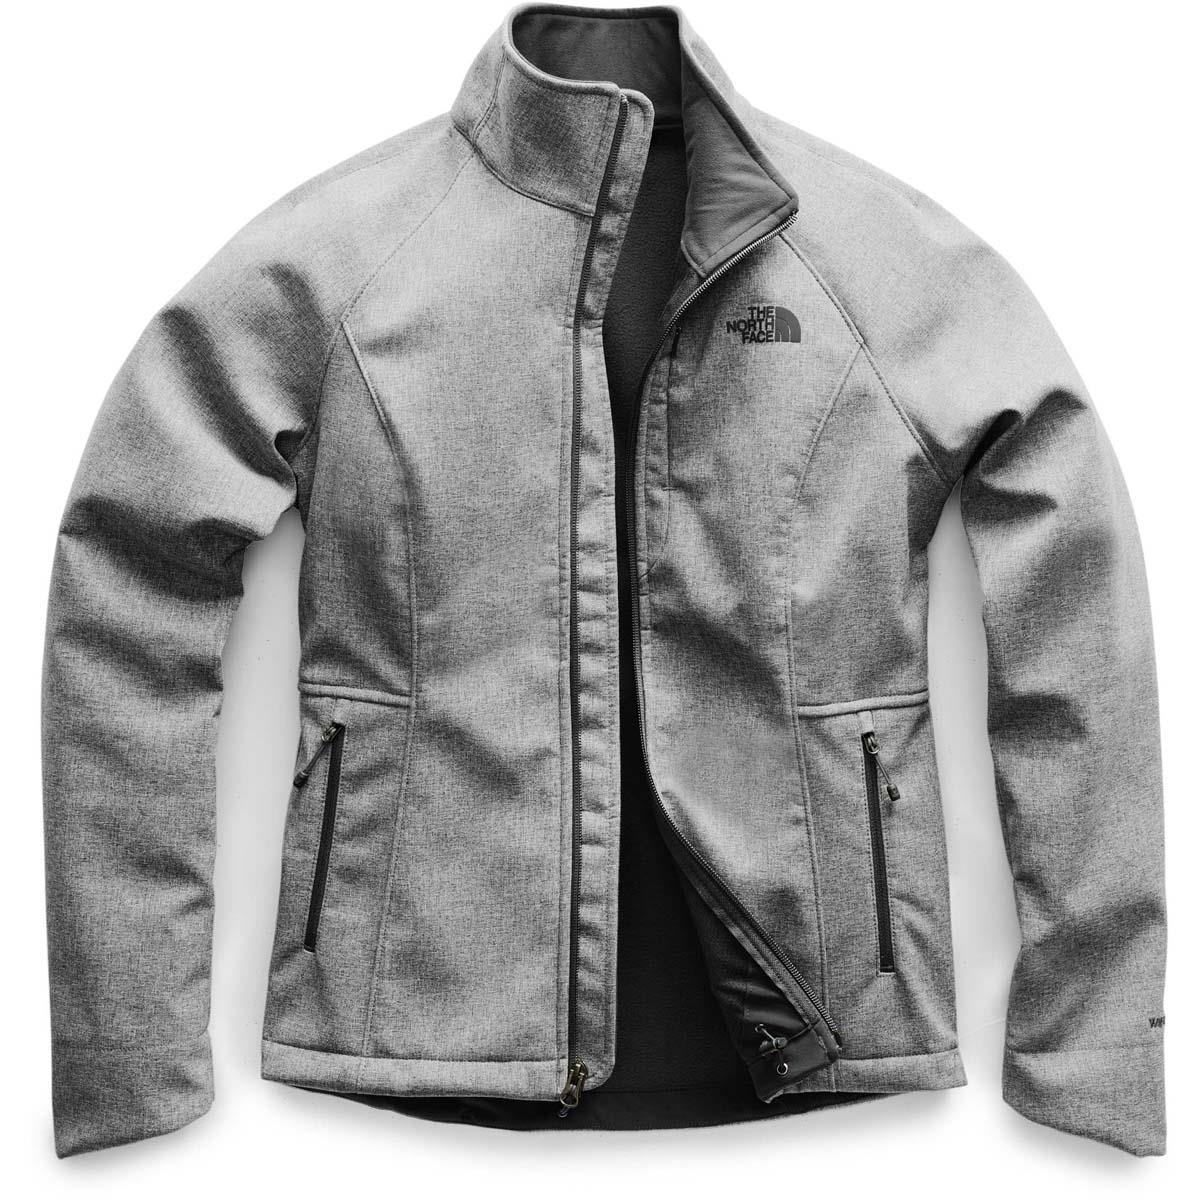 north face apex bionic 2 jacket